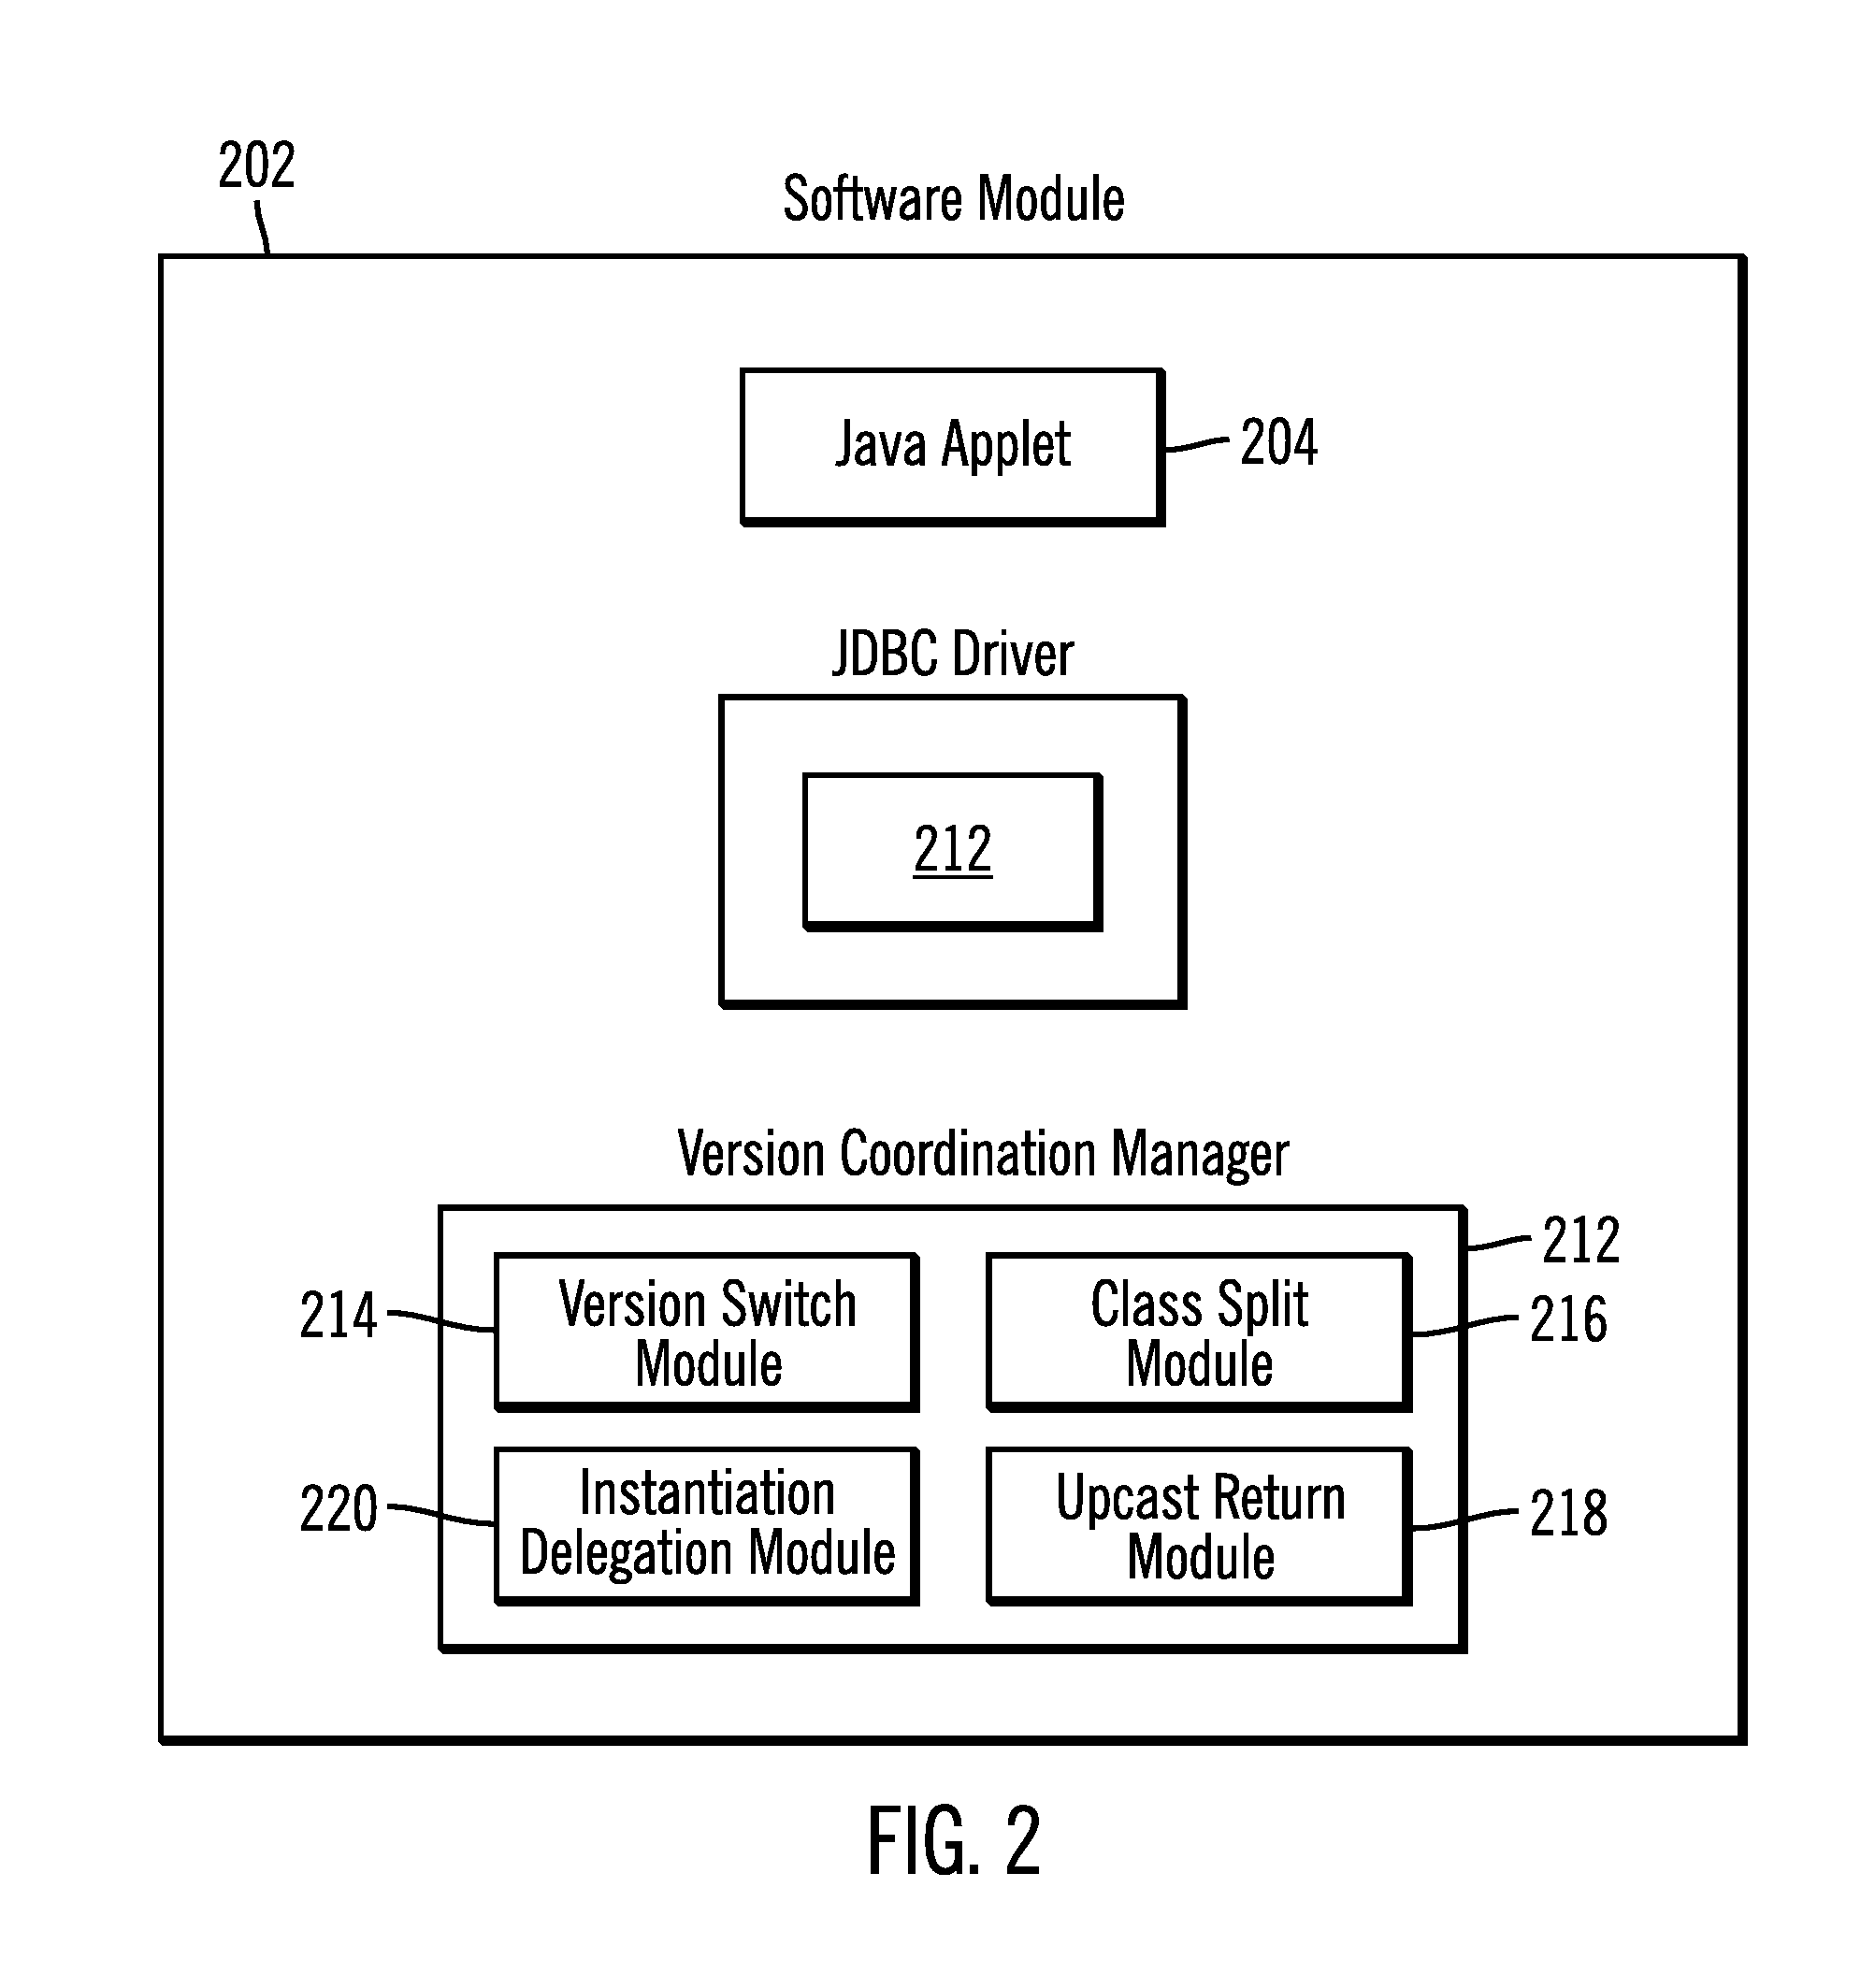 Single stream processing with multi-version support of application operating environments